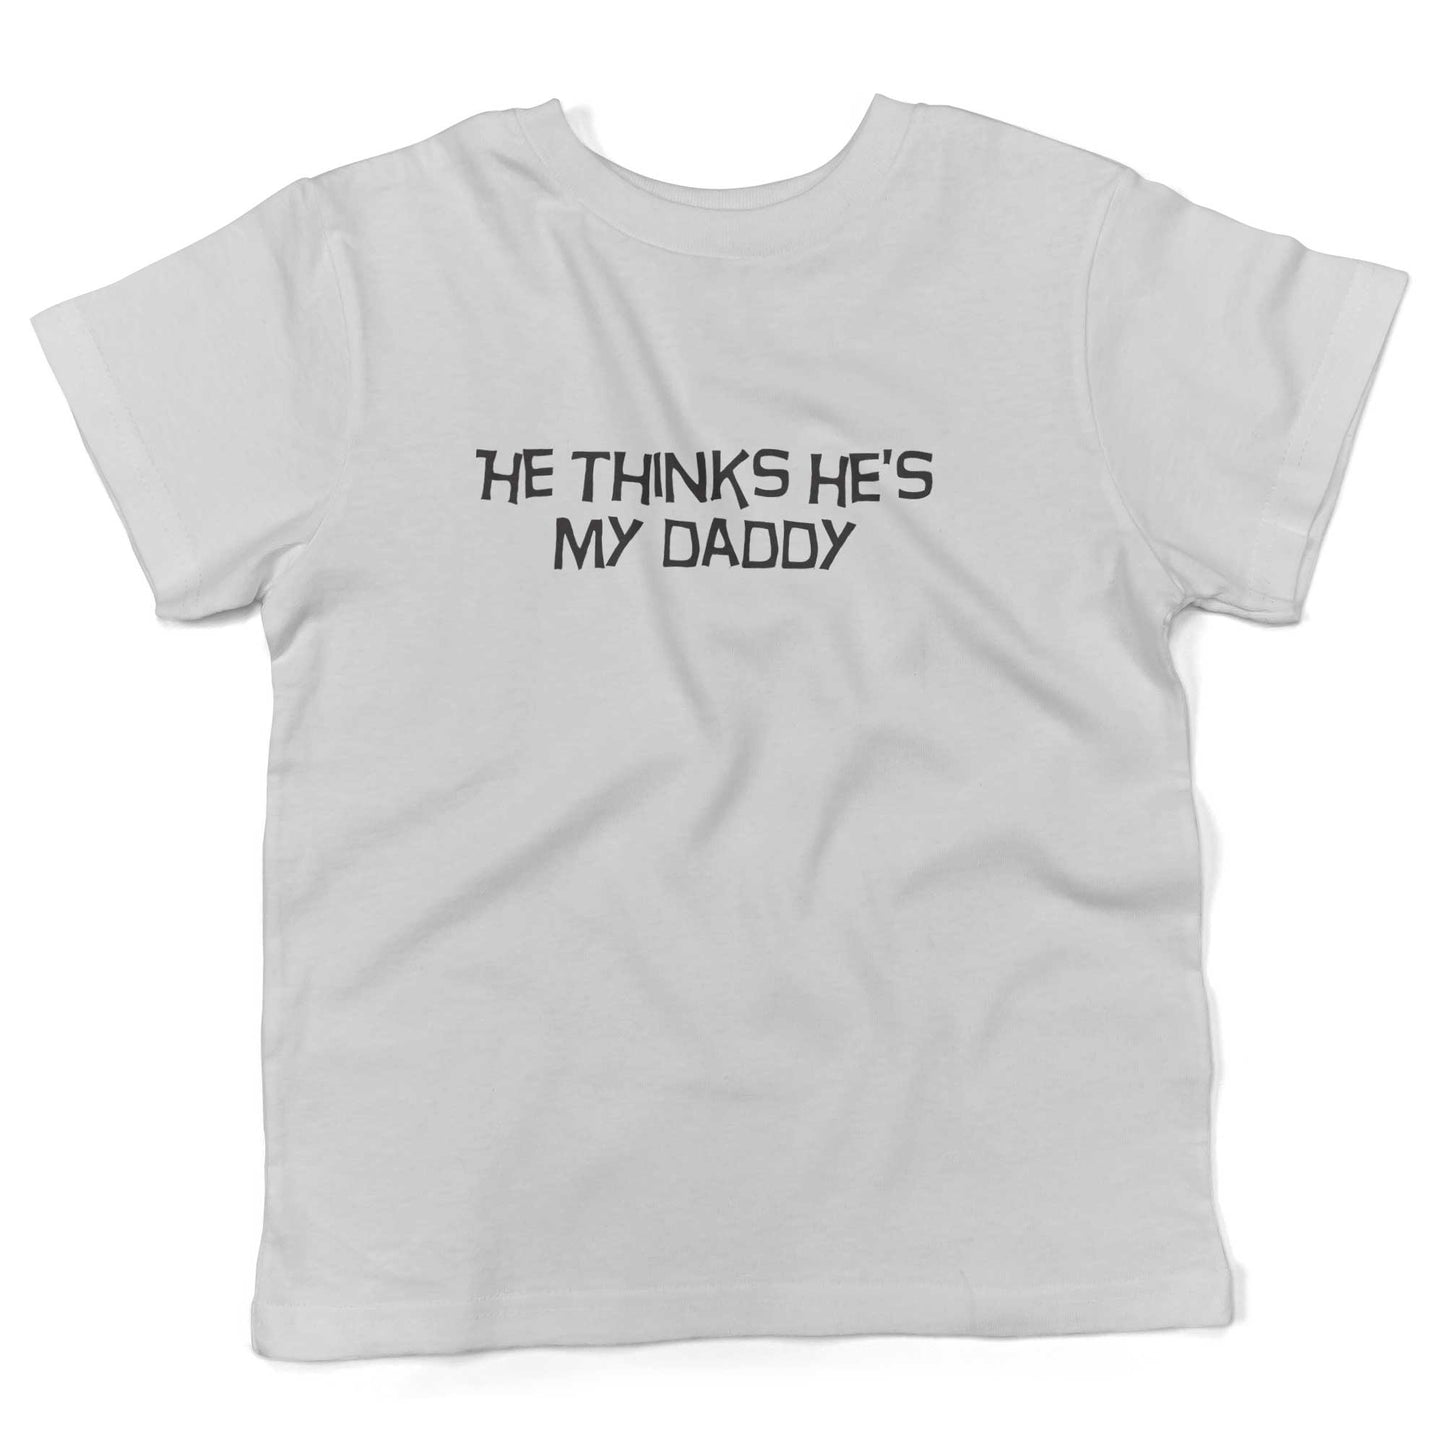 He Thinks He's My Daddy Toddler Shirt-White-2T